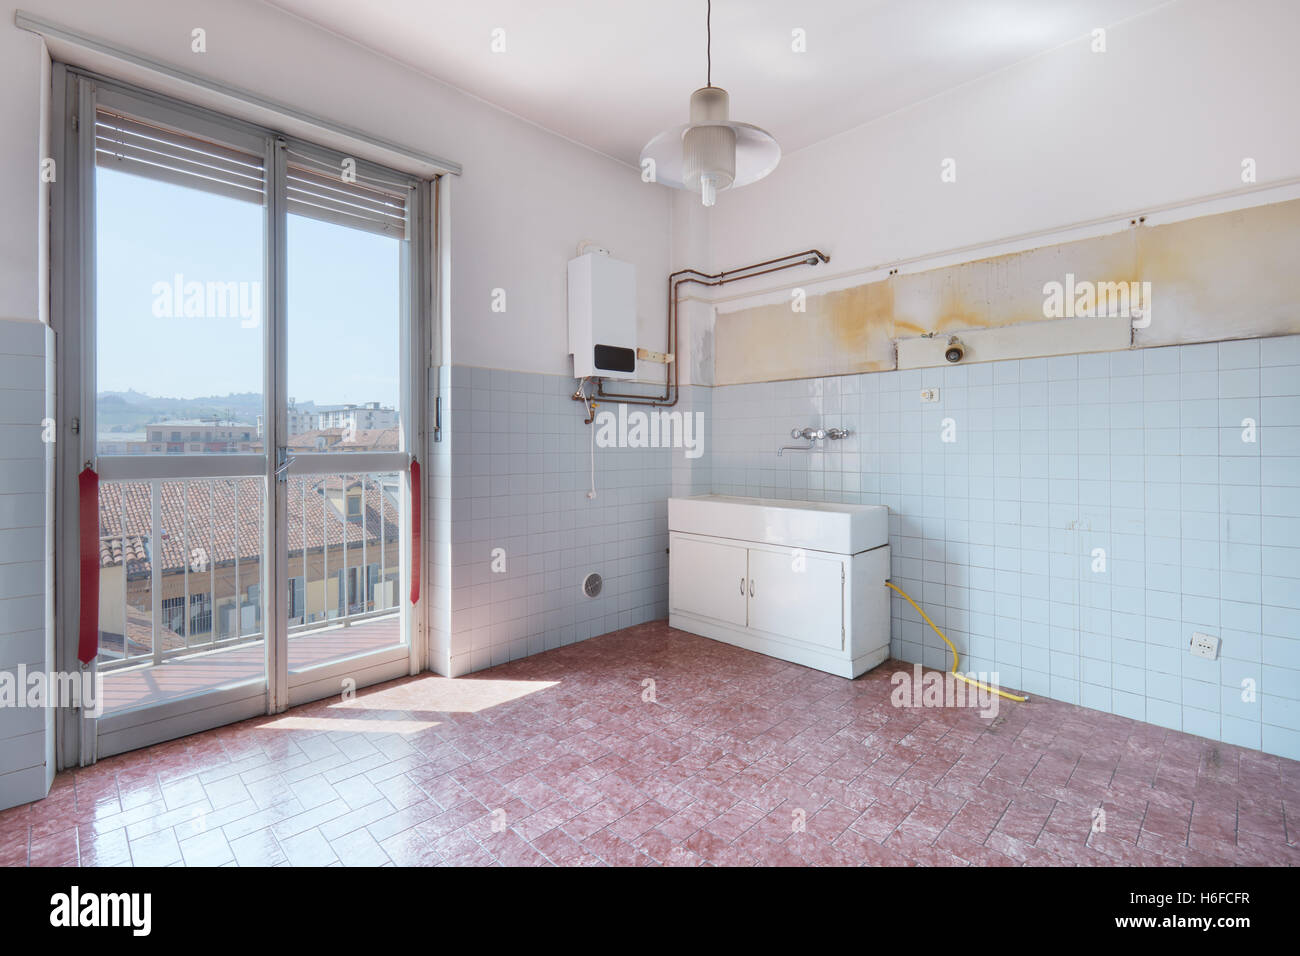 Old empty kitchen room with tiled floor and walls Stock Photo